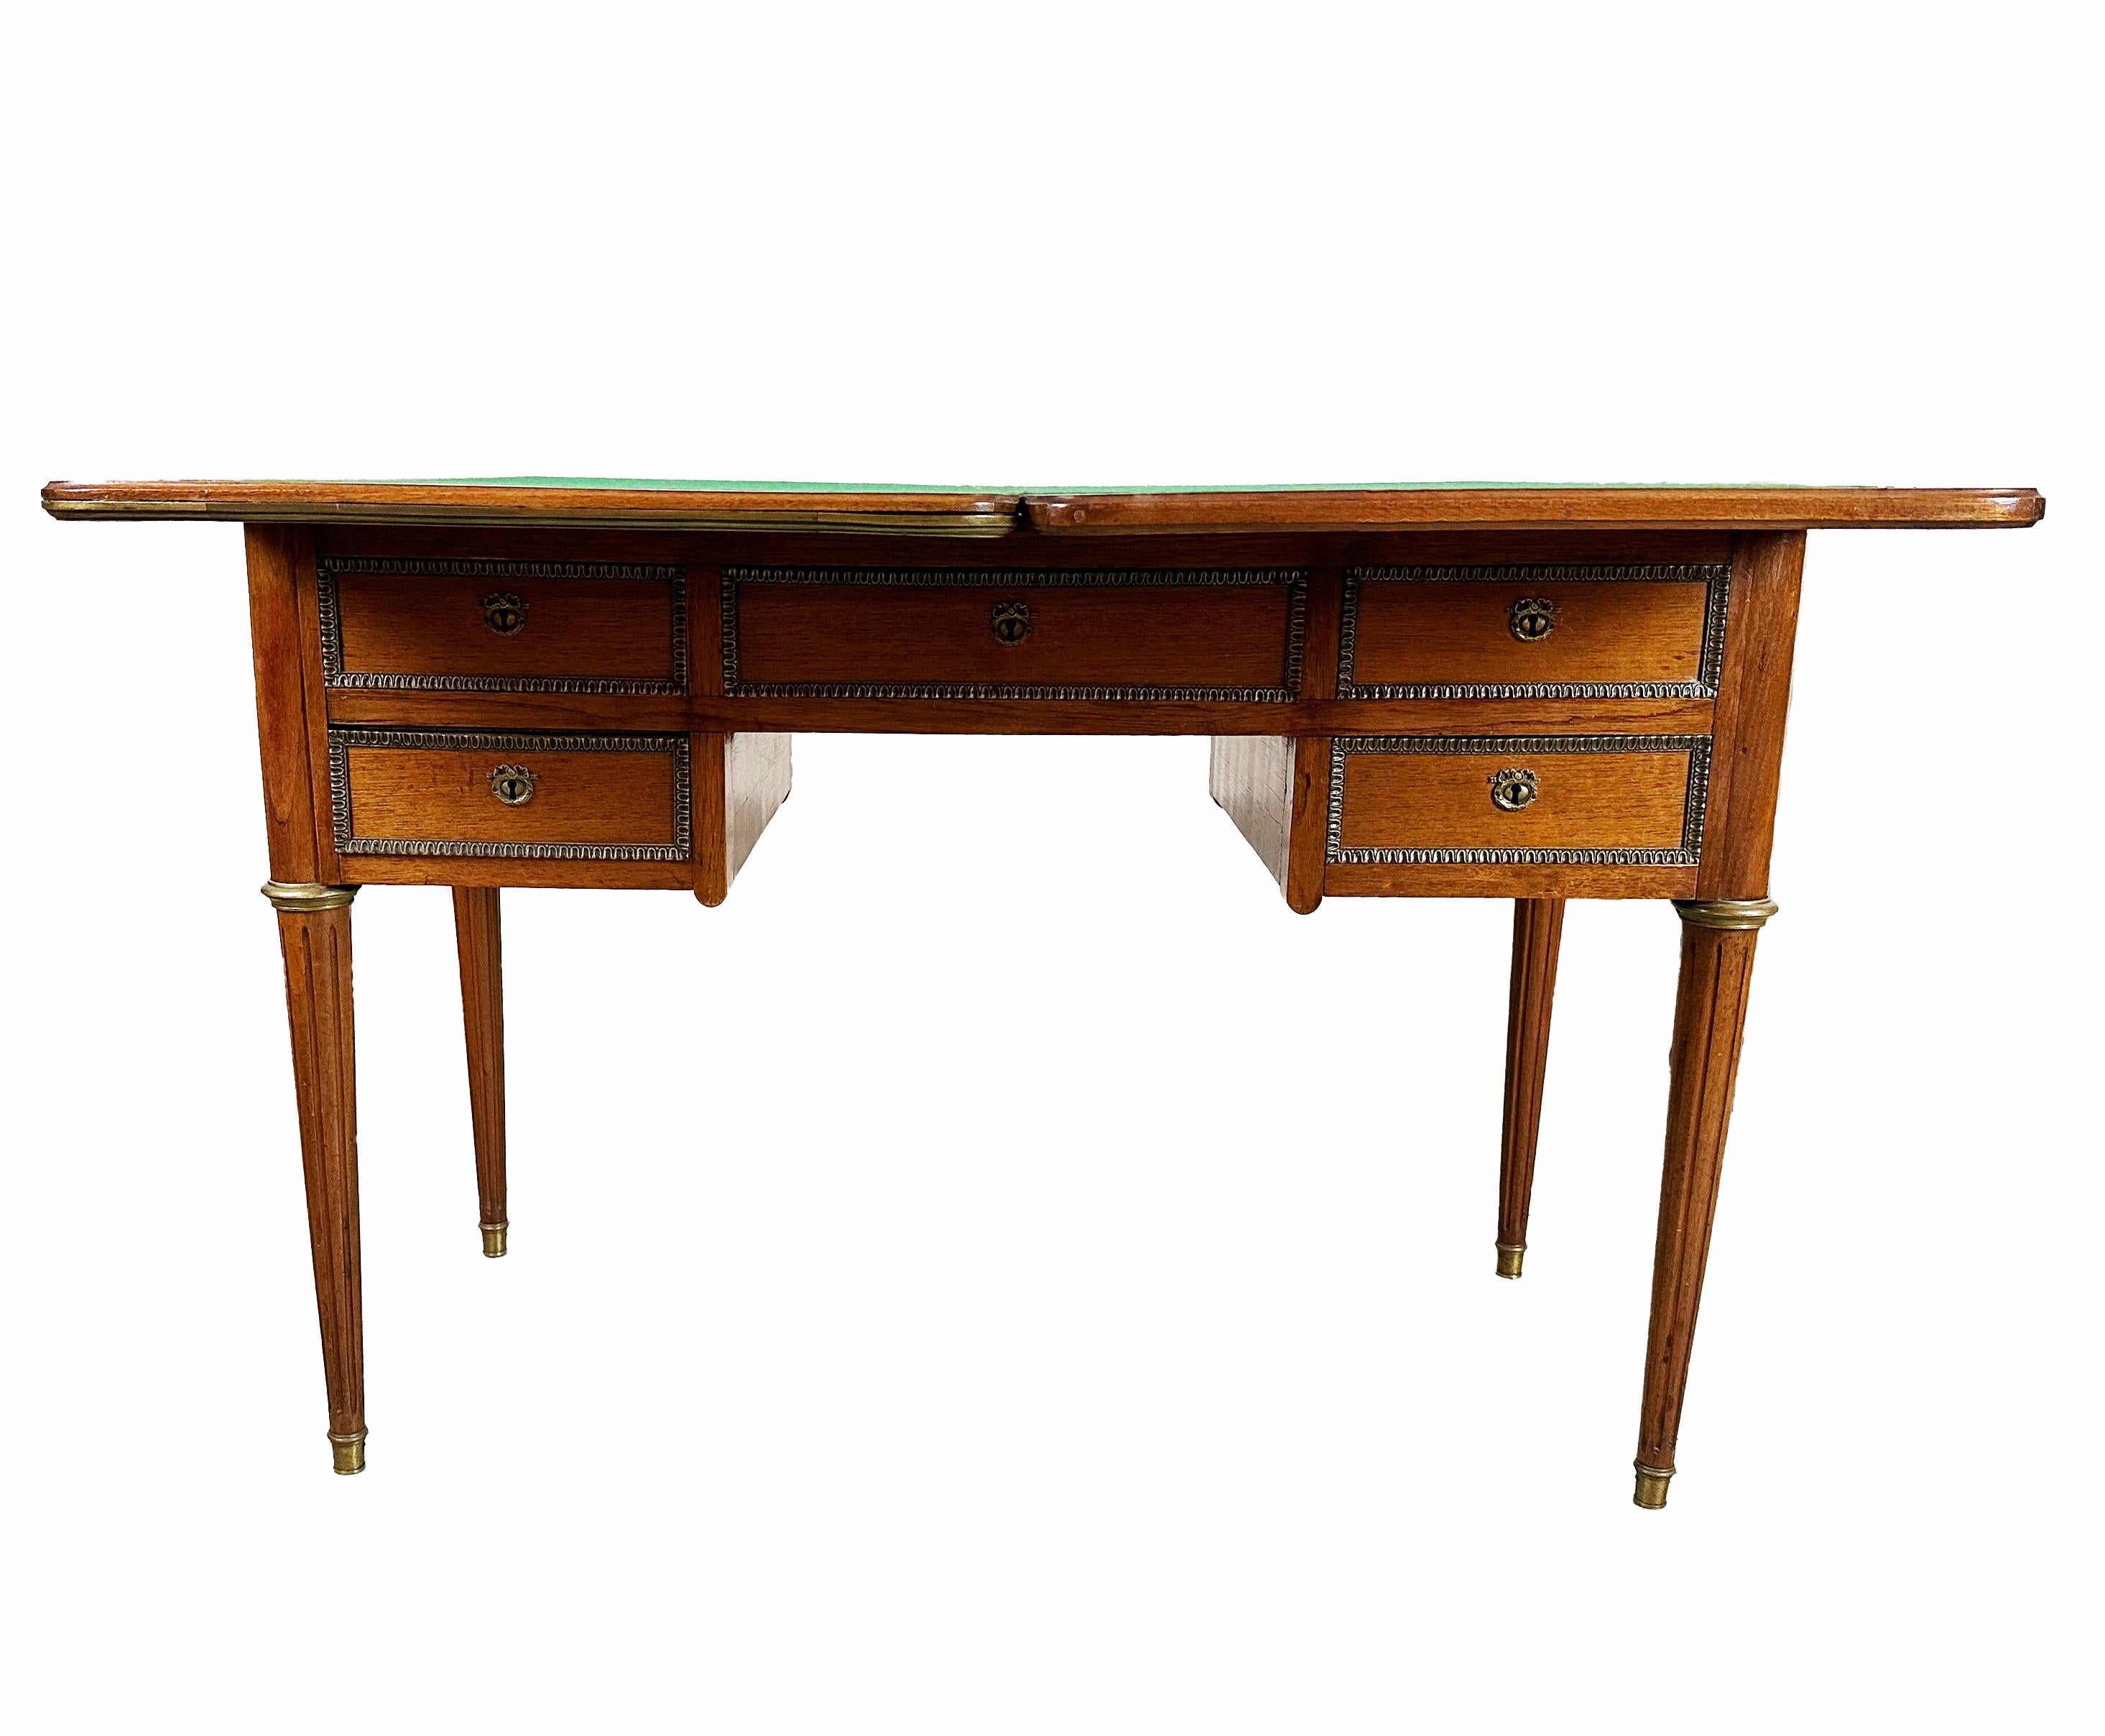 19th Century Foldable Game/ Desk Table in the Louis XVI Style